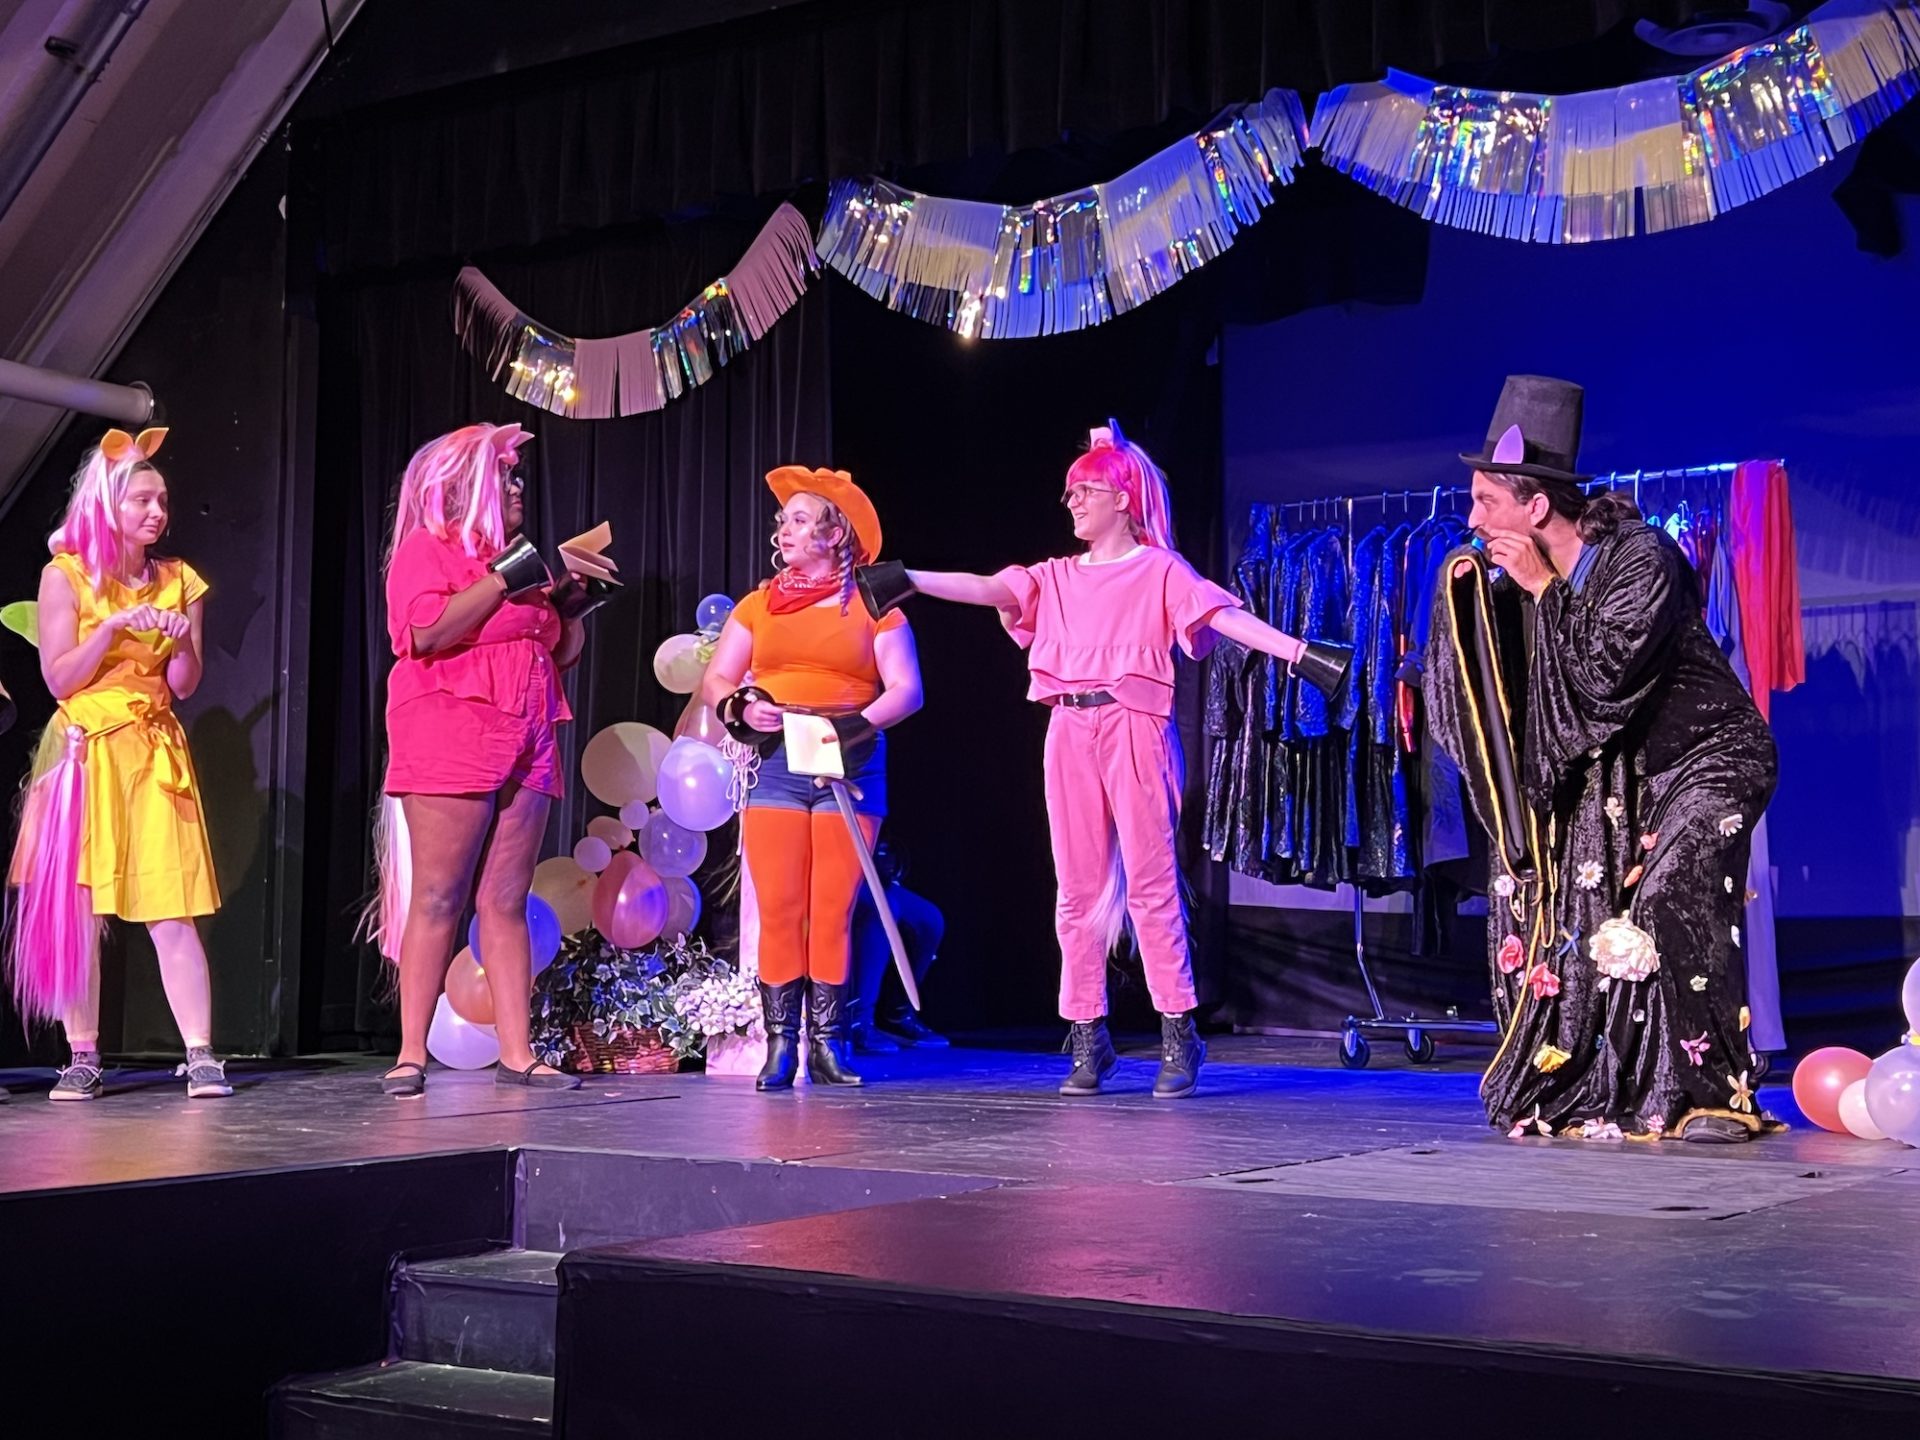 A darkly lit theatre stage; there are party decorations; actors stand on stage dressed as colorful magical ponies. A man is on the right, with a black hat and dressed all in black.